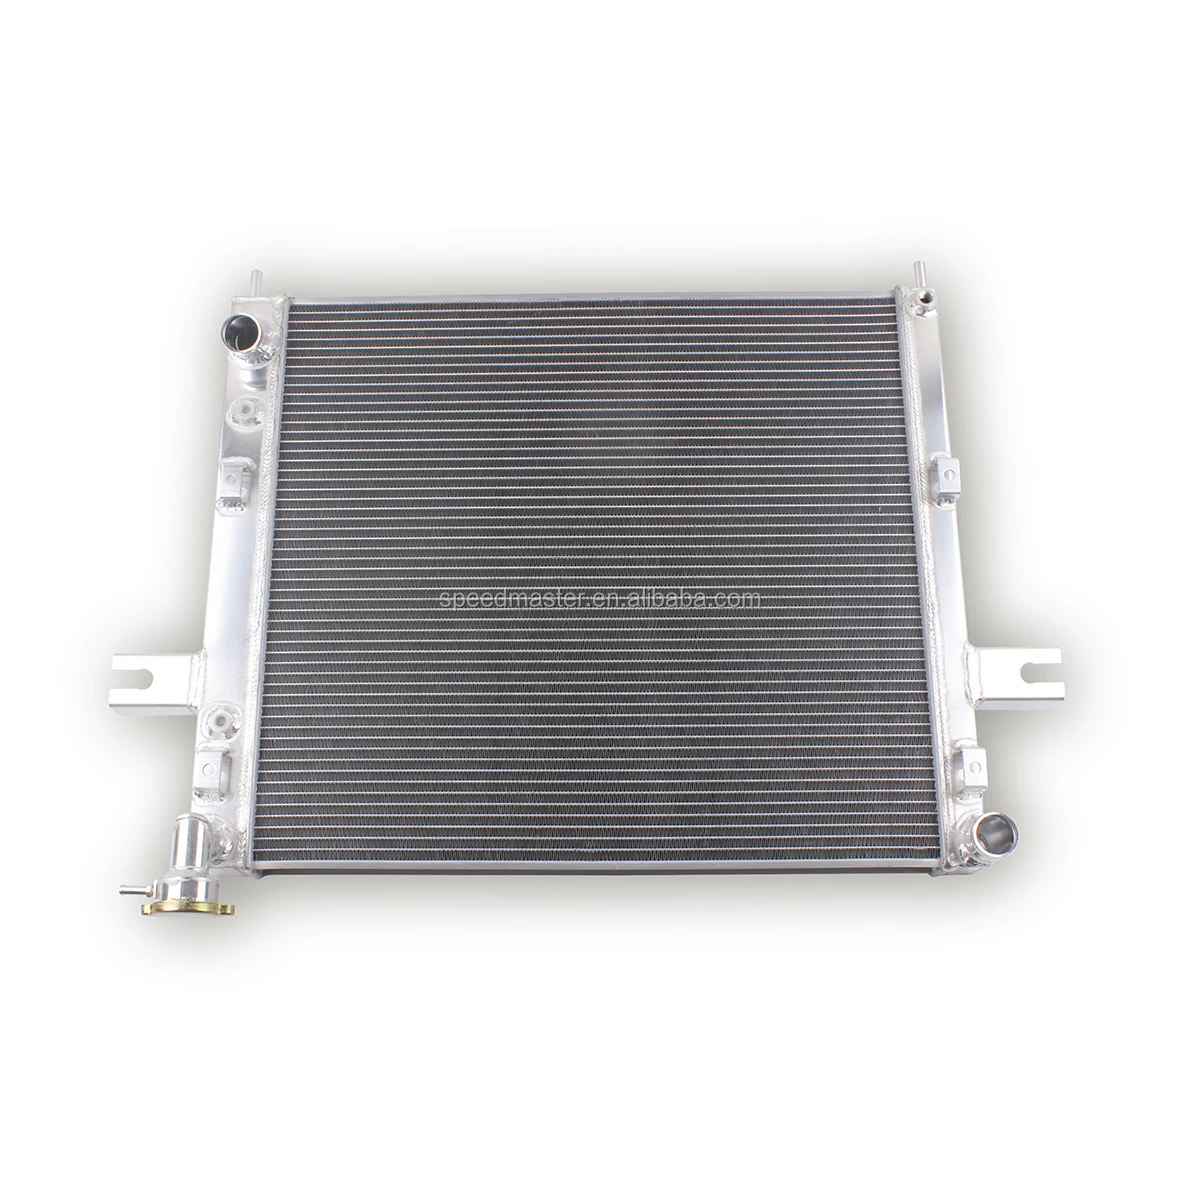 Radiator For 1999-2000 Jeep Grand Cherokee 4.7L V8 Fast Free Shipping